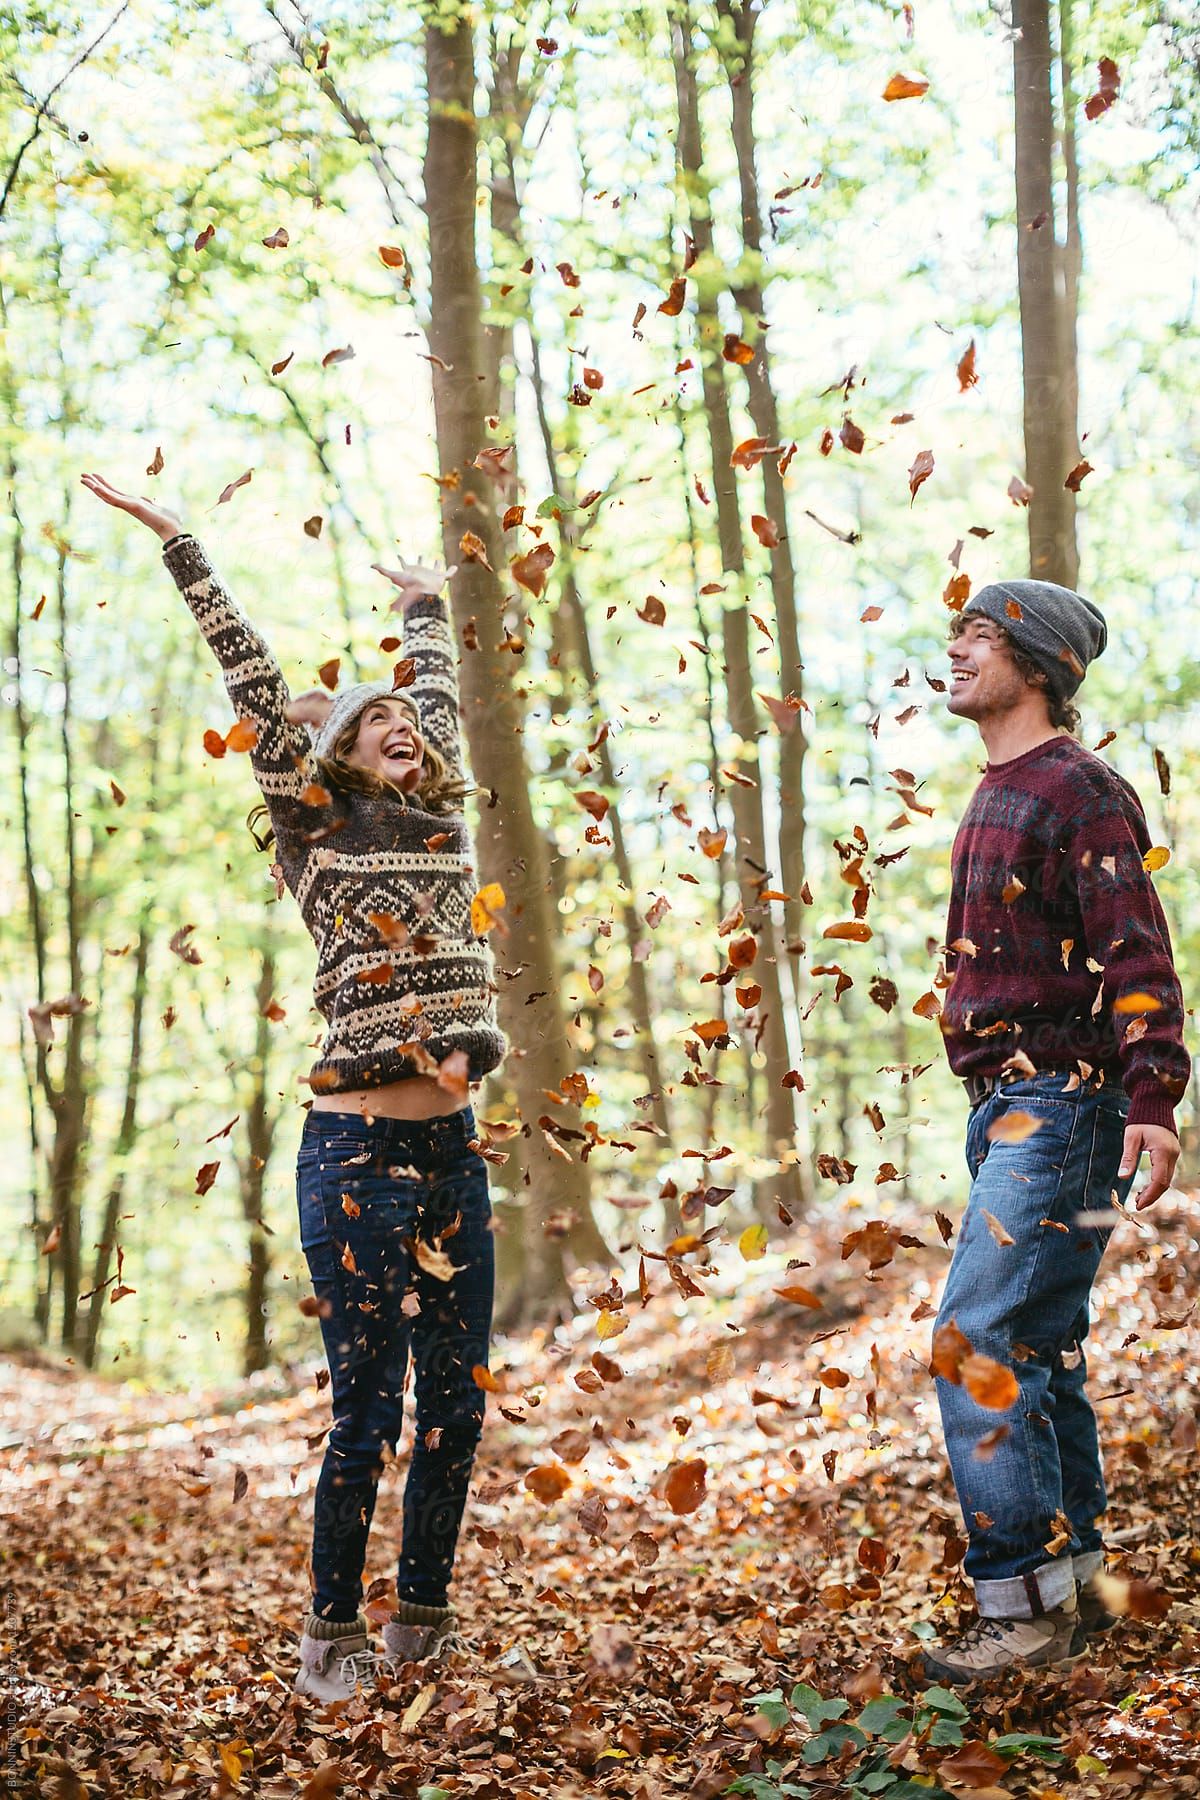 Couple In Love Playing With Leaves On The Woods In Autumn. by BONNINSTUDIO, Woods